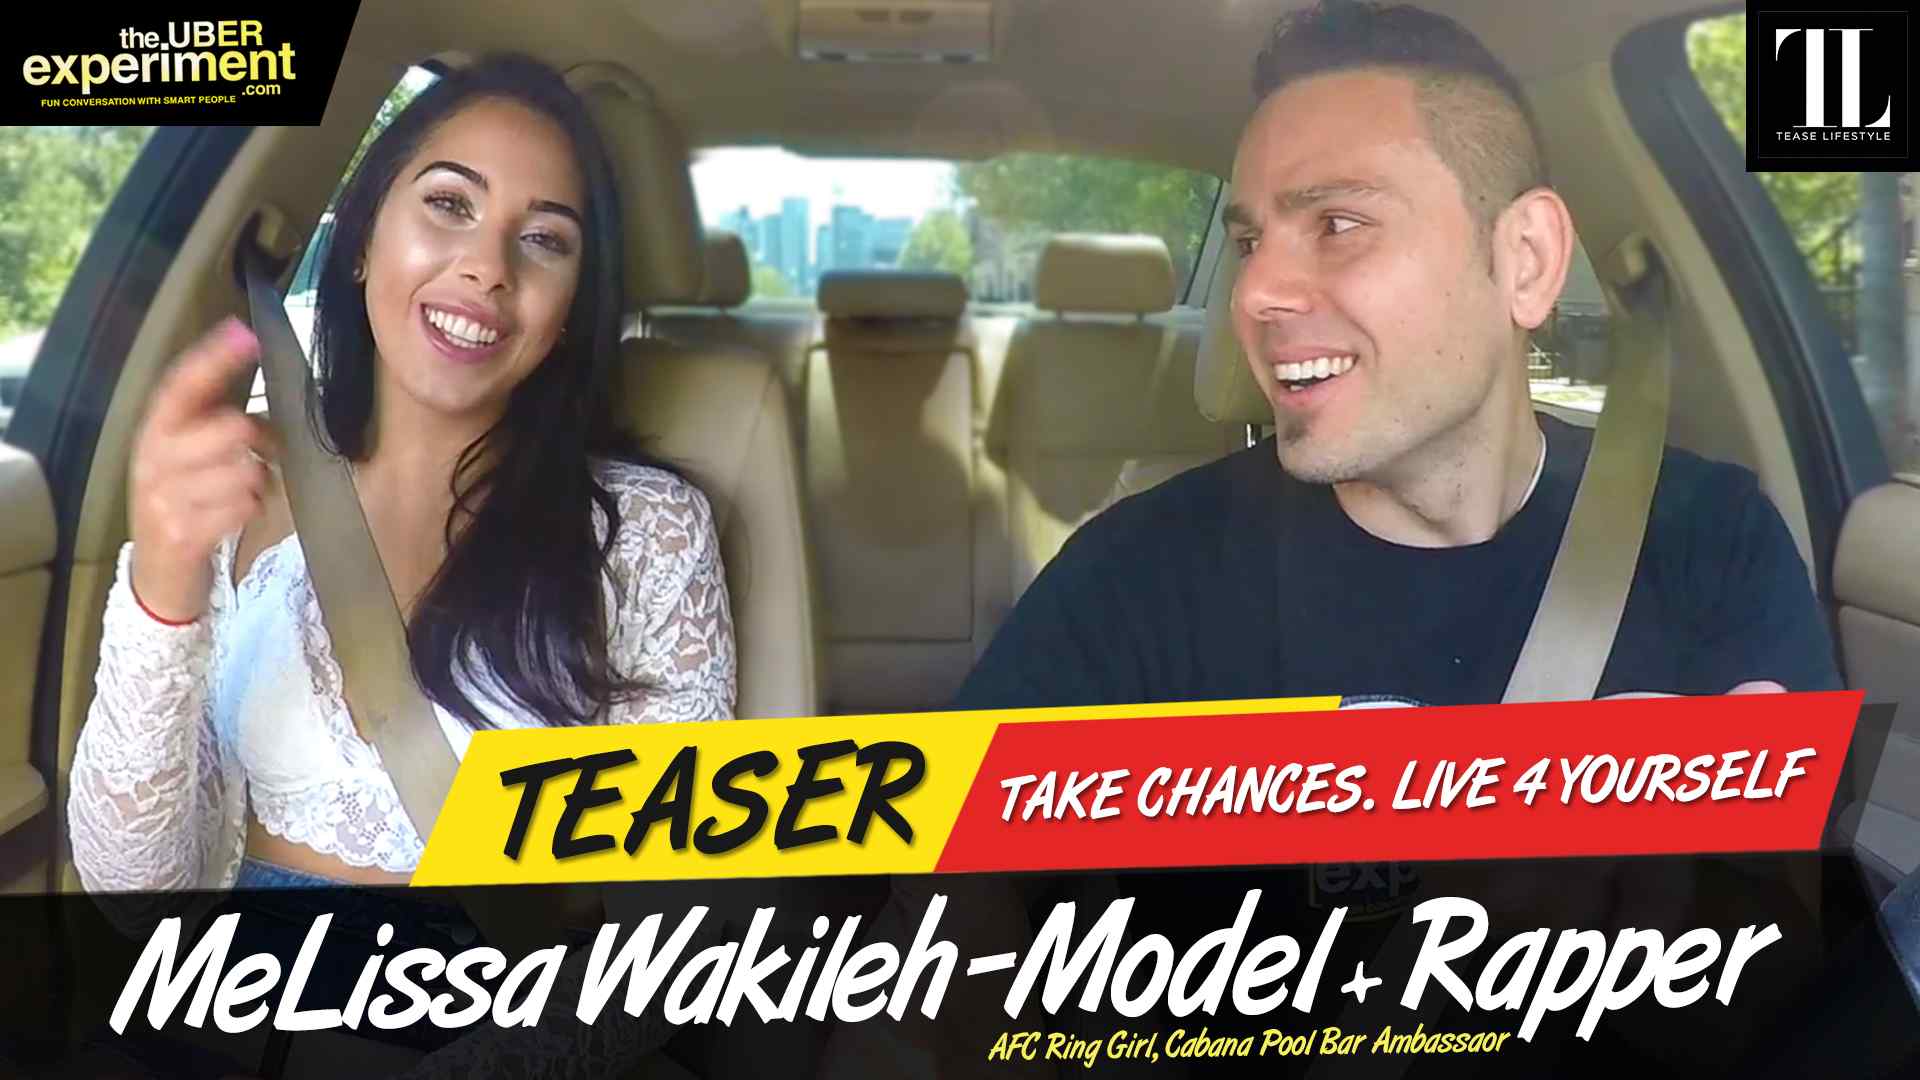 TAKE CHANCES. LIVE 4 YOURSELF - Model, AFC Girl MELISSA WAKILEH on The Uber Experiment Reality Show